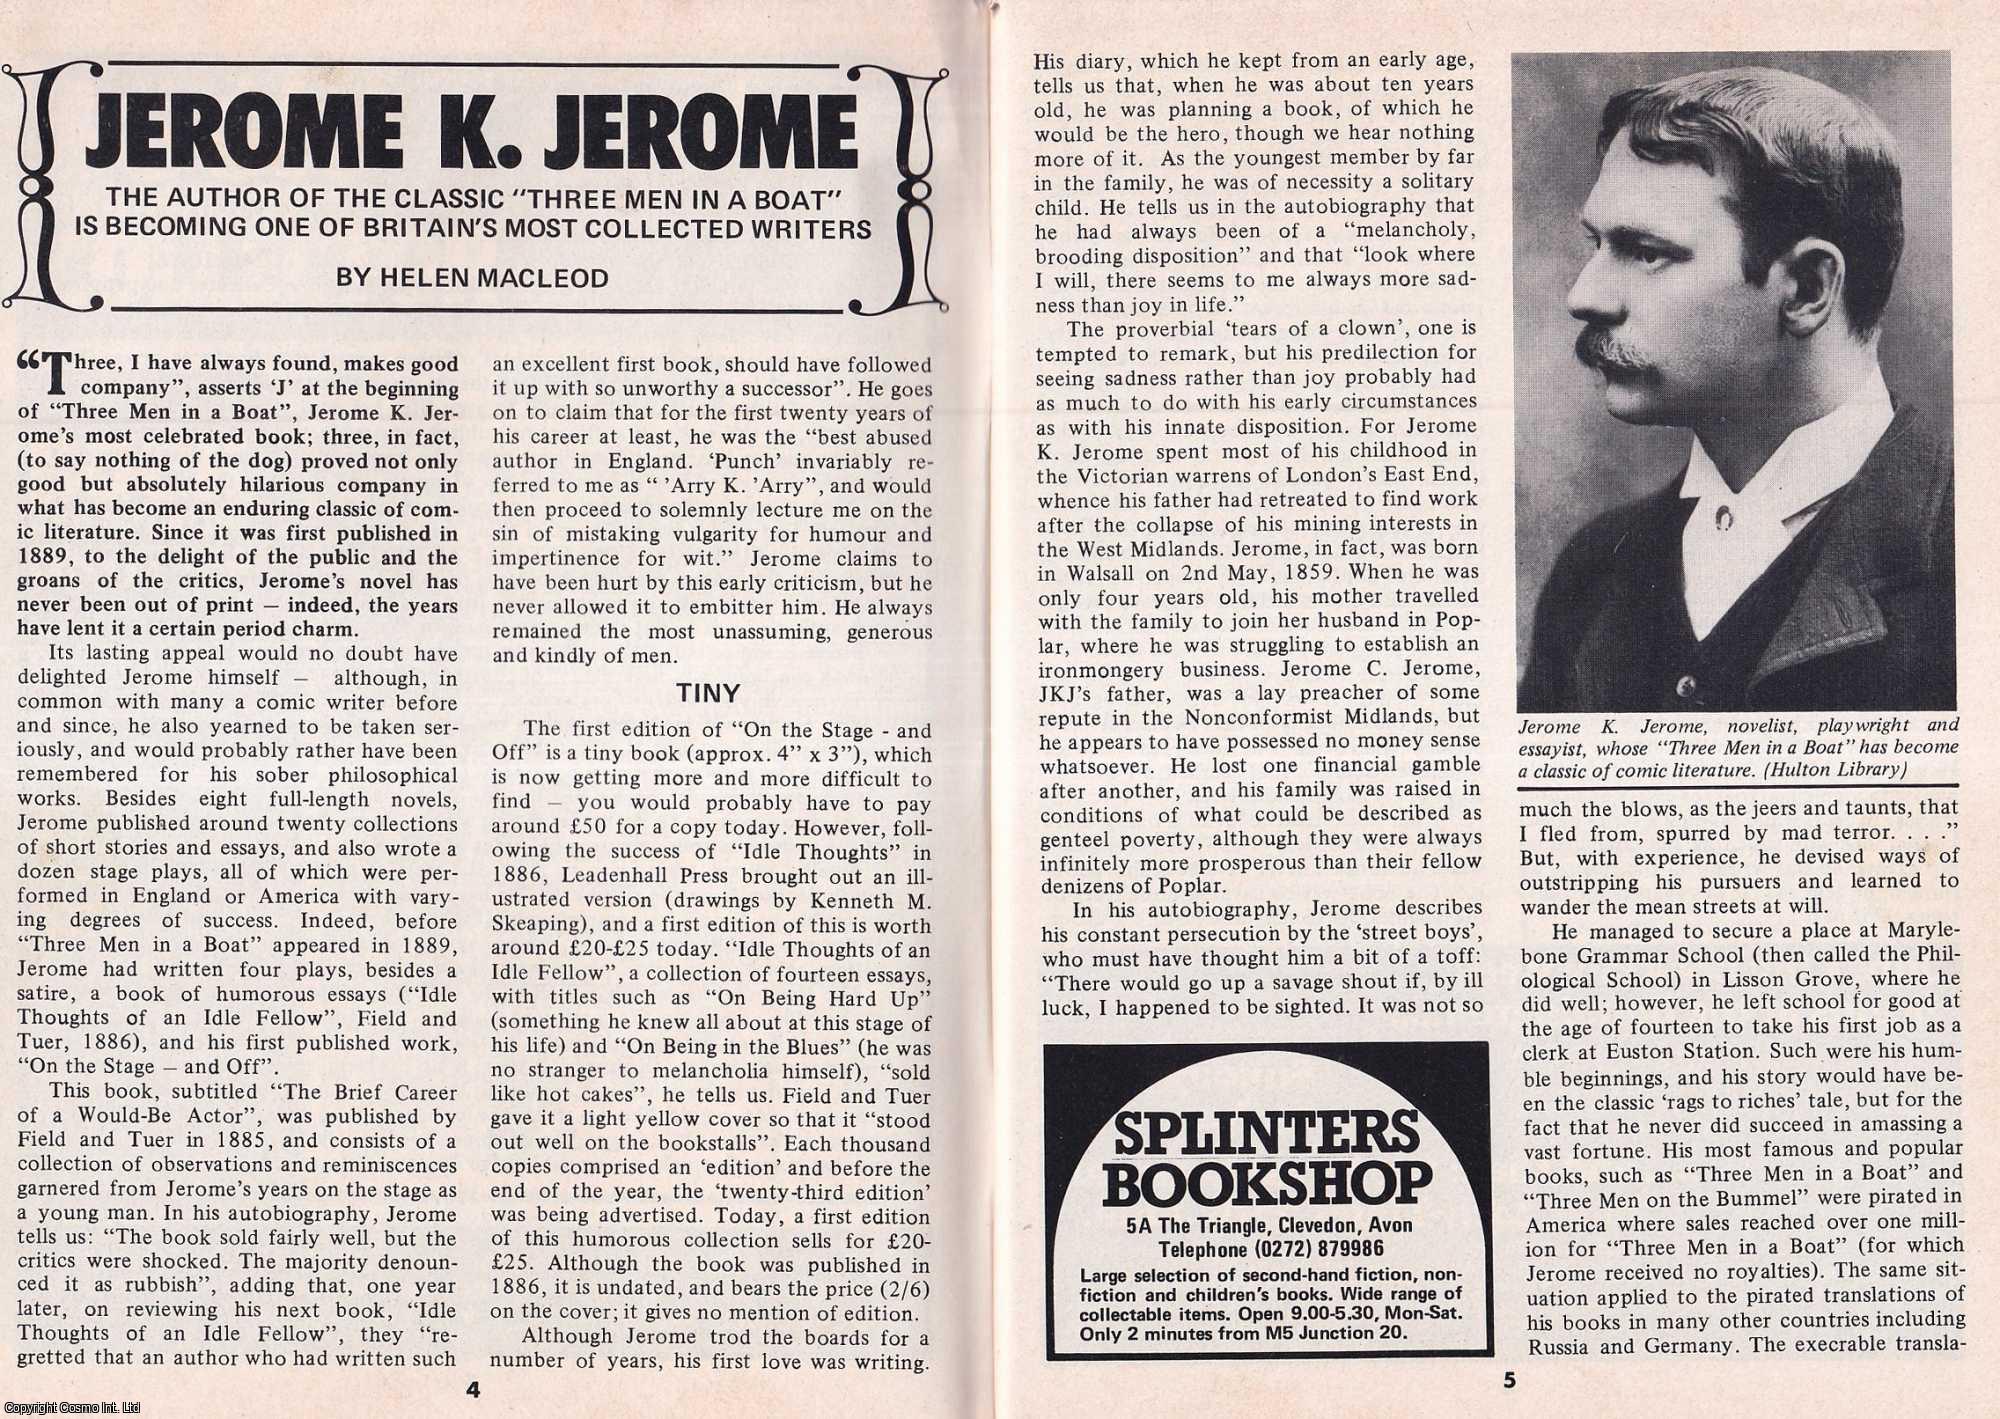 Helen Macleod - Jerome Klapka Jerome : Author of The Classic Three Men in a Boat. This is an original article separated from an issue of The Book & Magazine Collector publication.